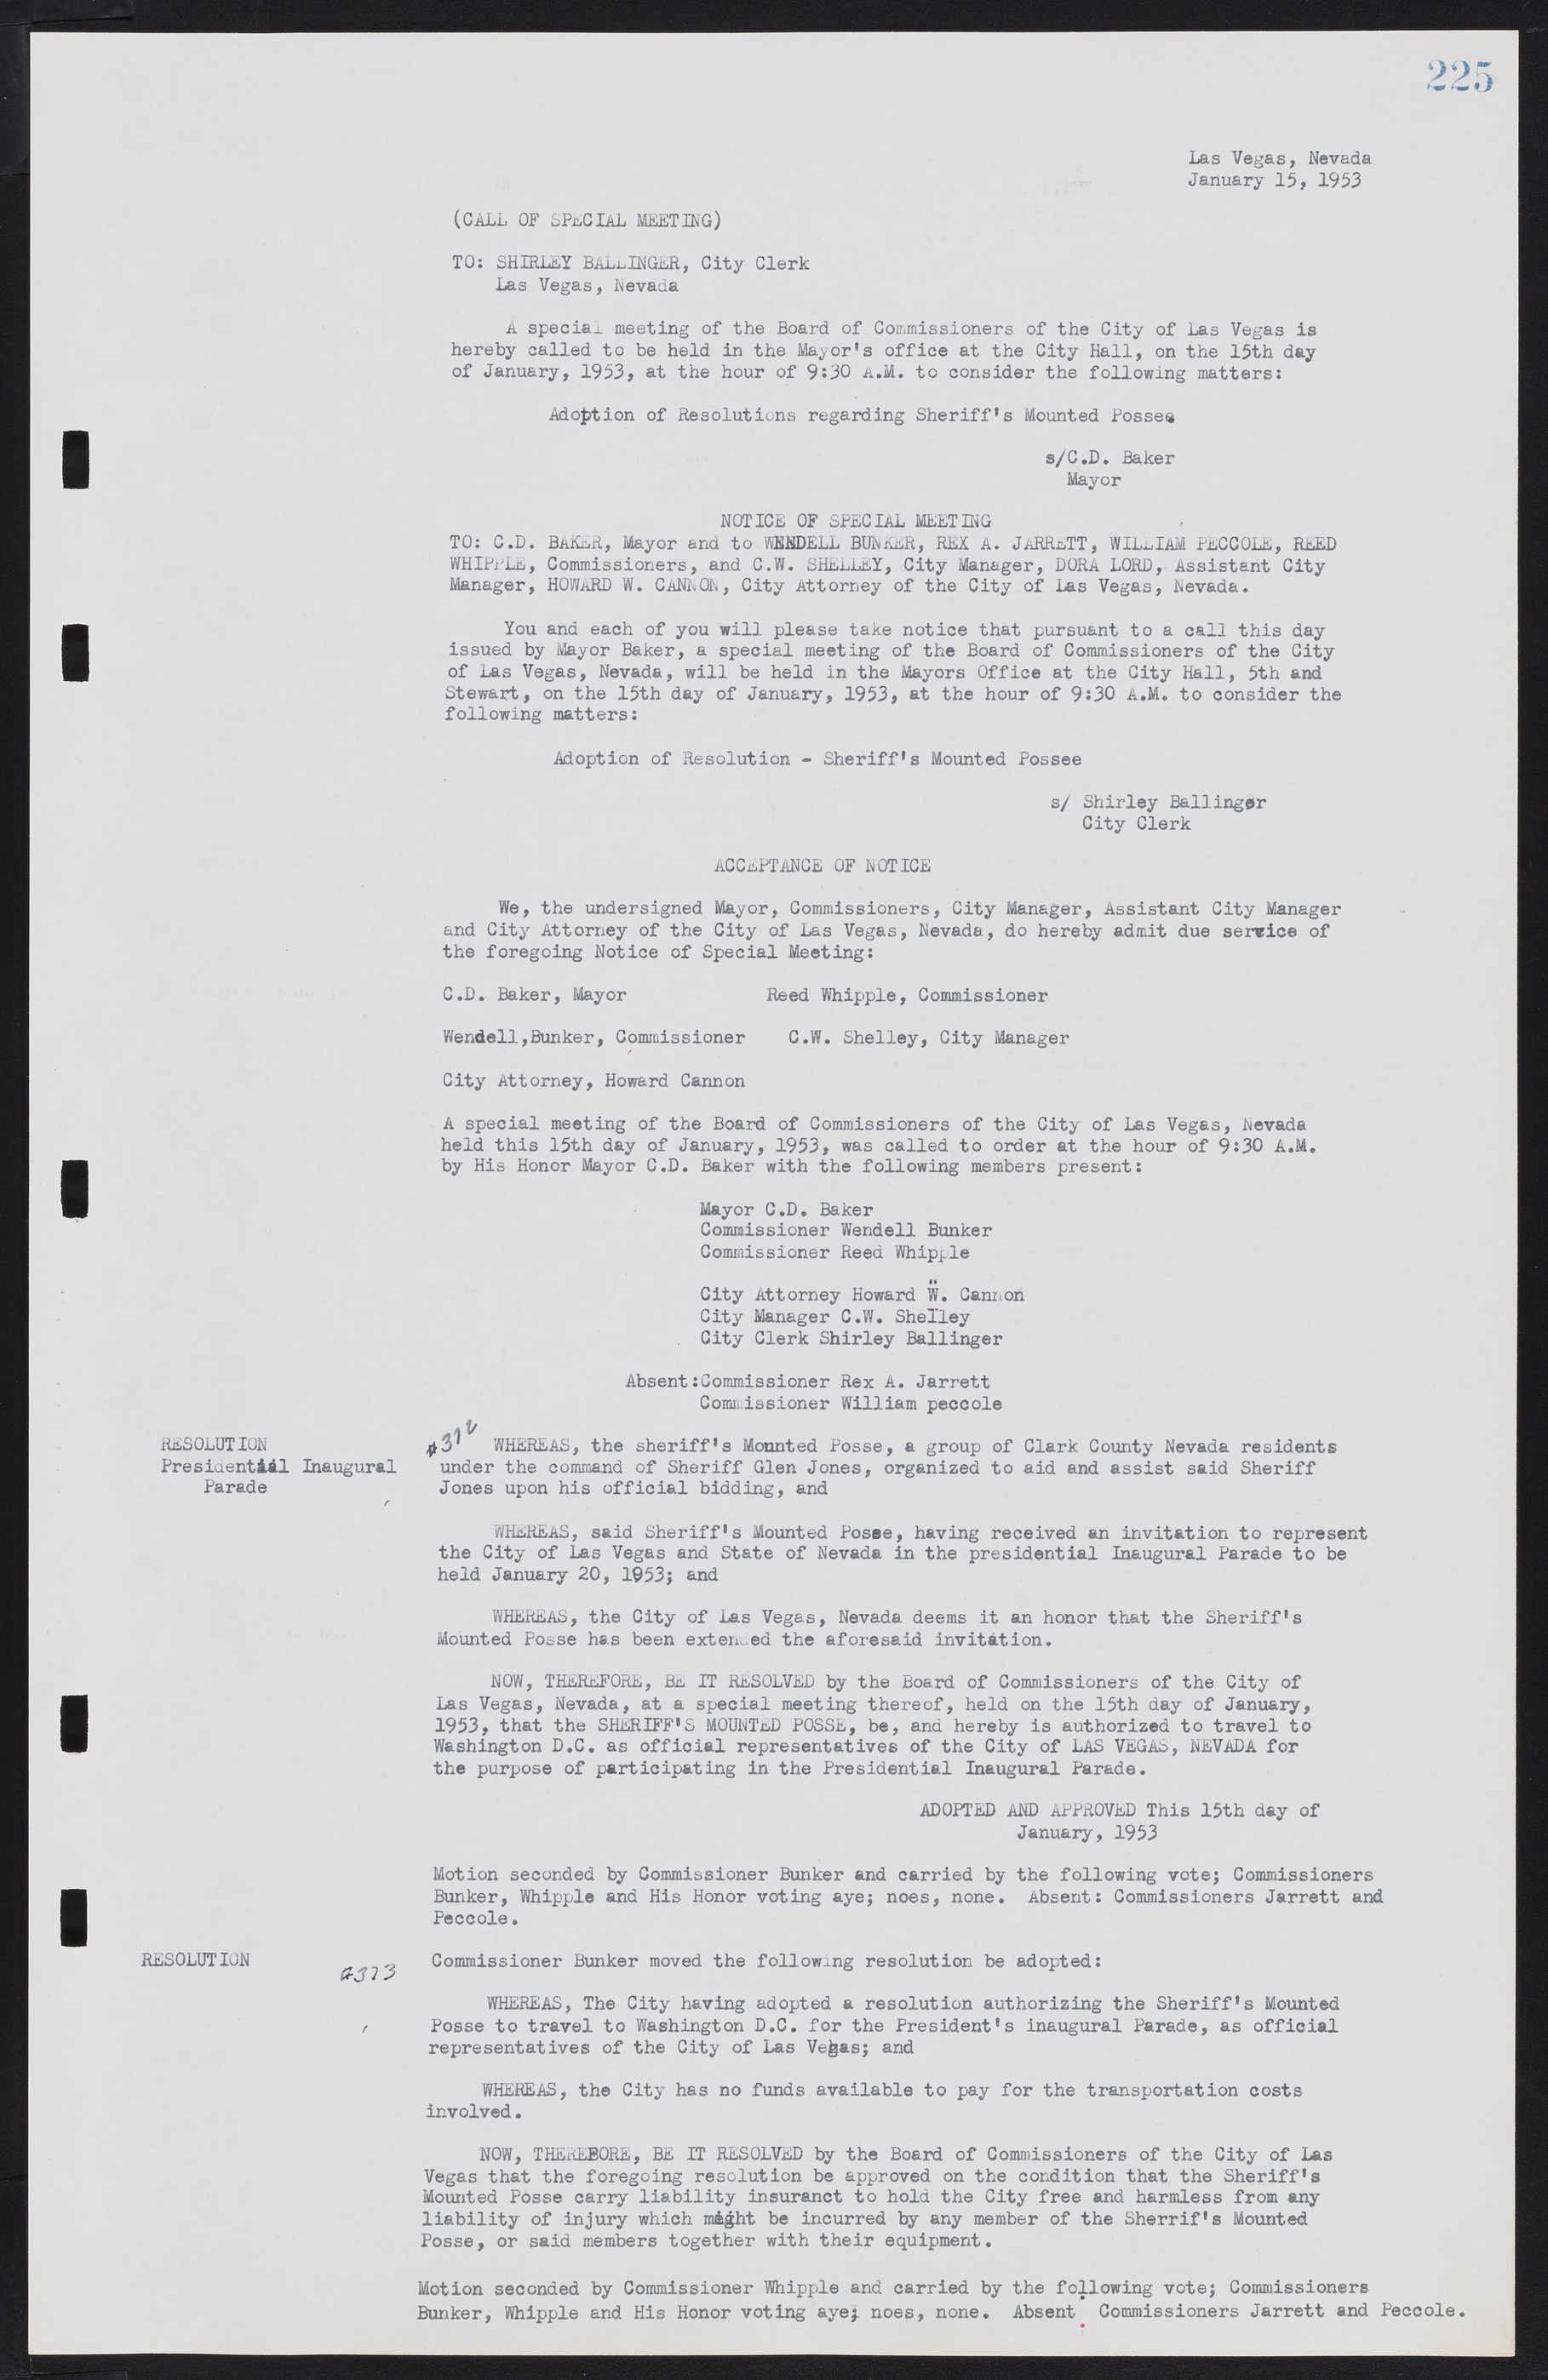 Las Vegas City Commission Minutes, May 26, 1952 to February 17, 1954, lvc000008-241